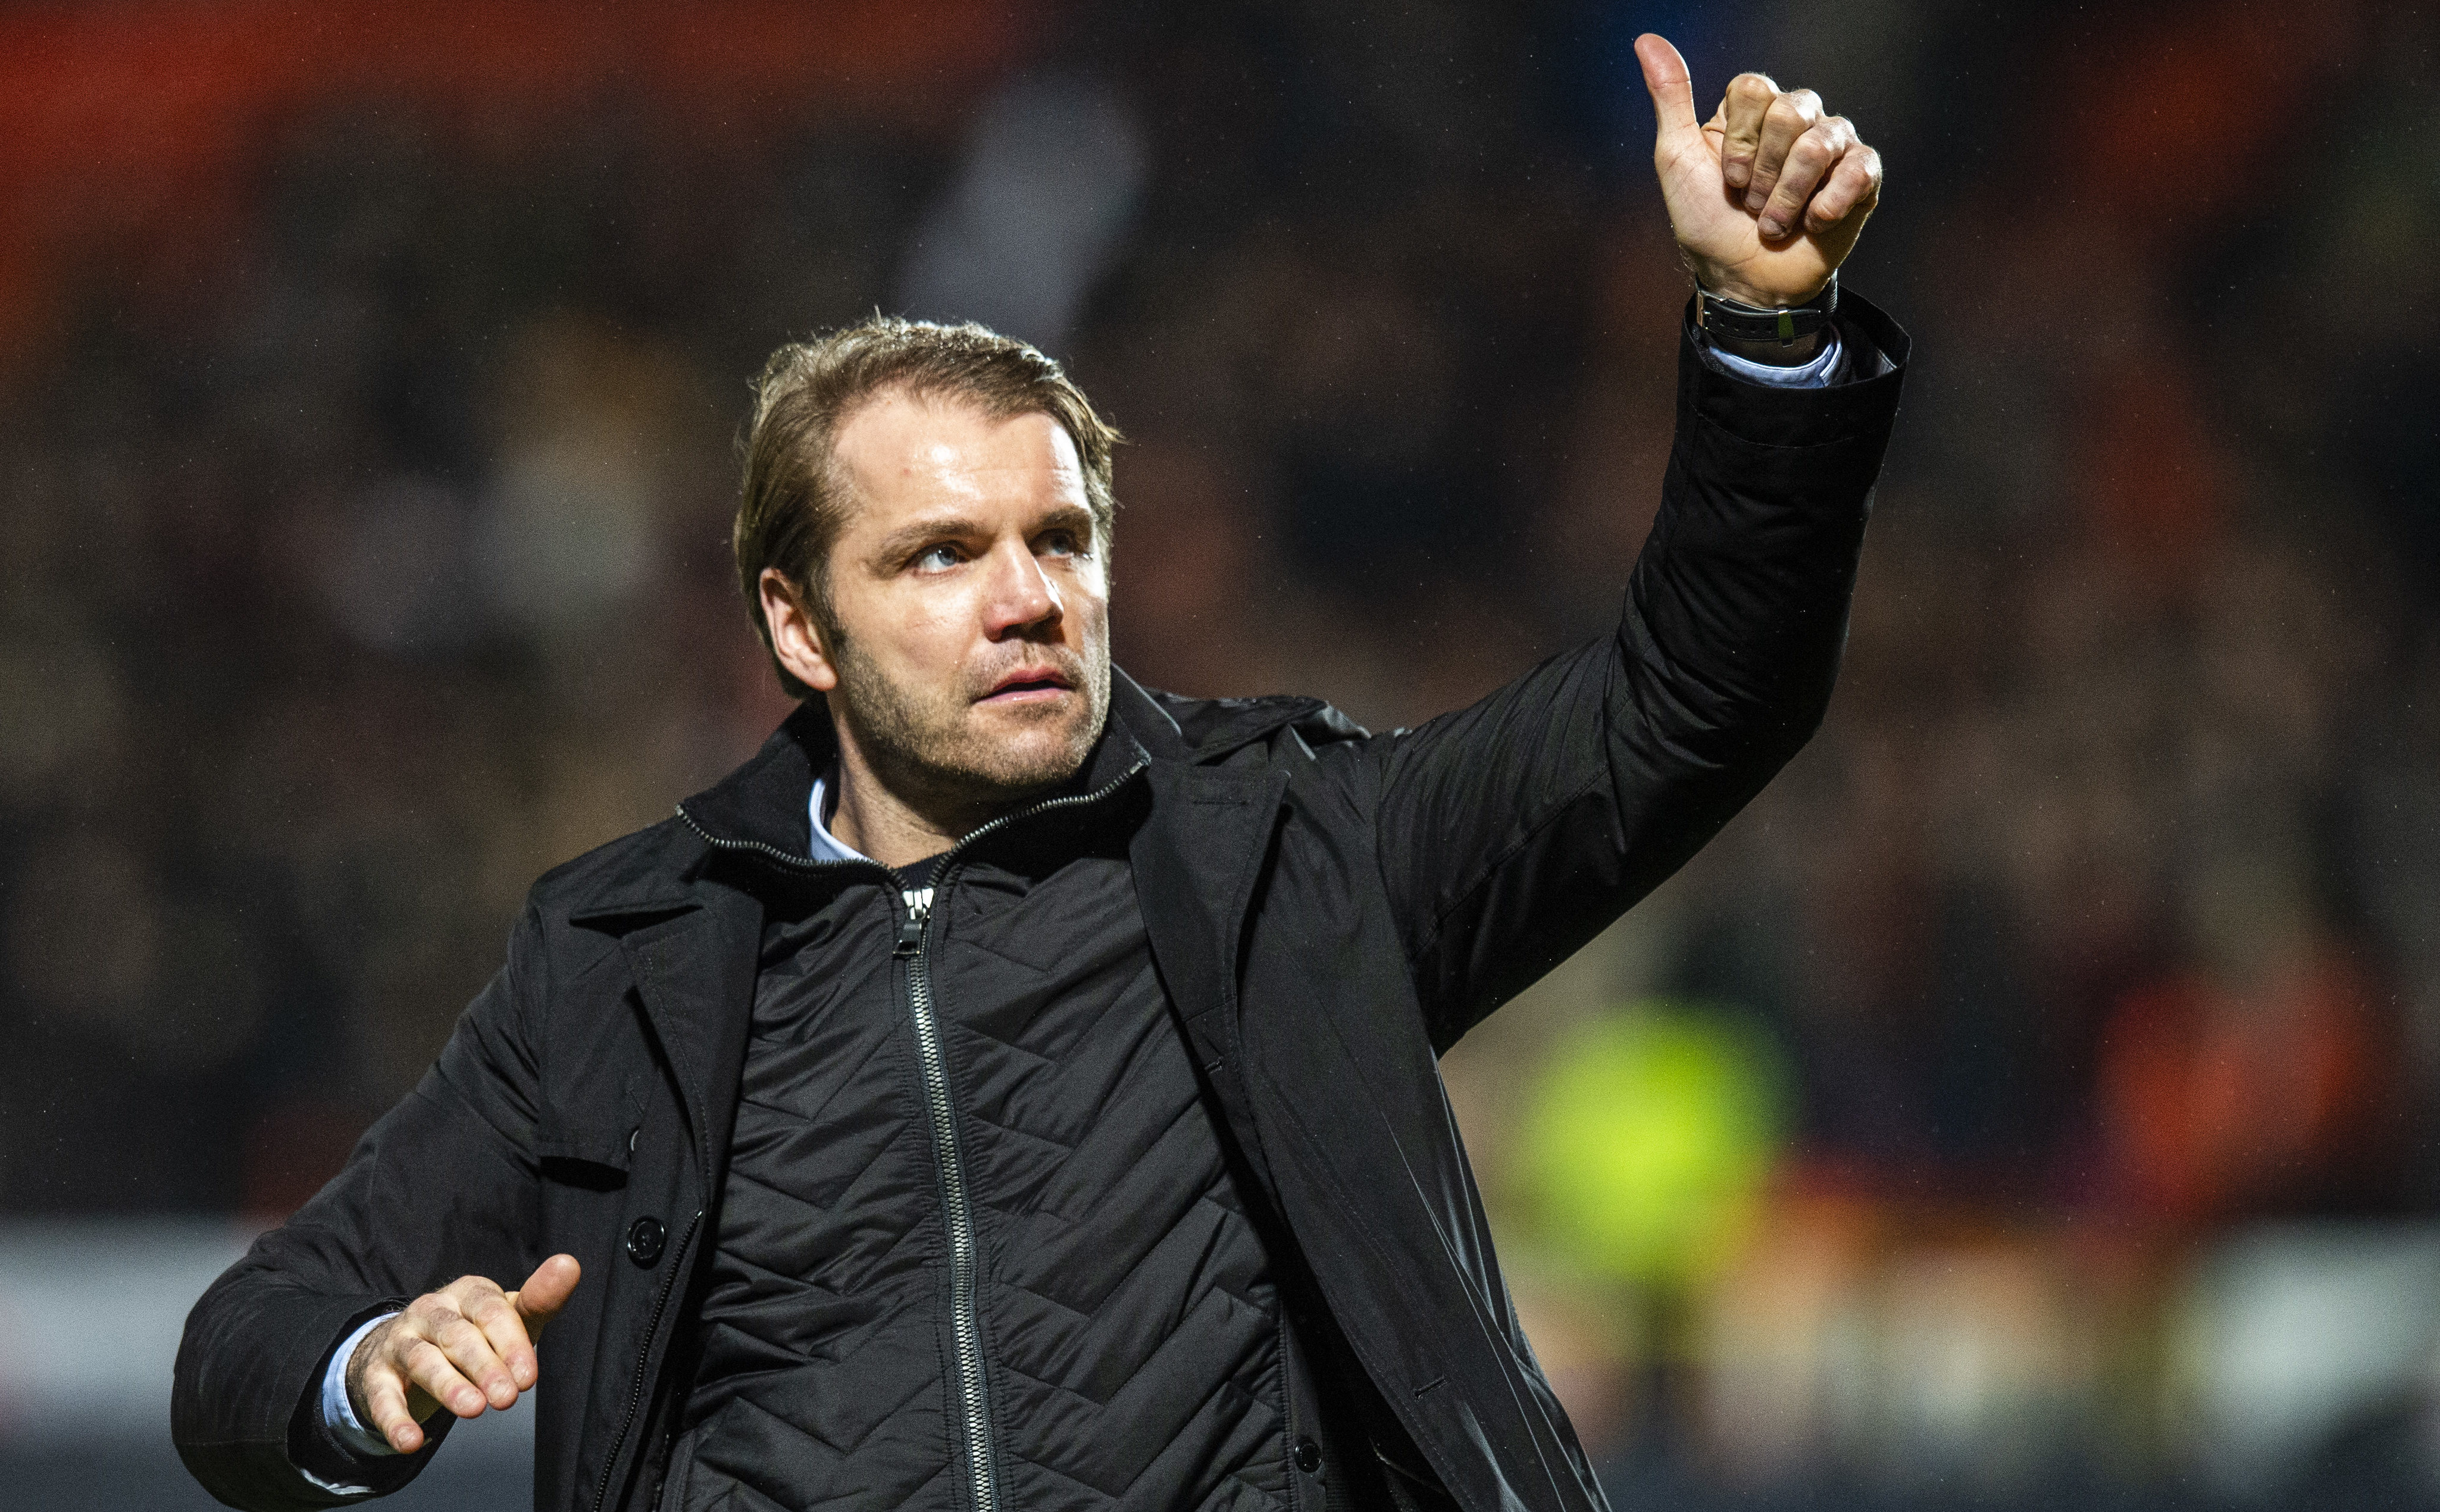 United boss Robbie Neilson can now plan for next season.